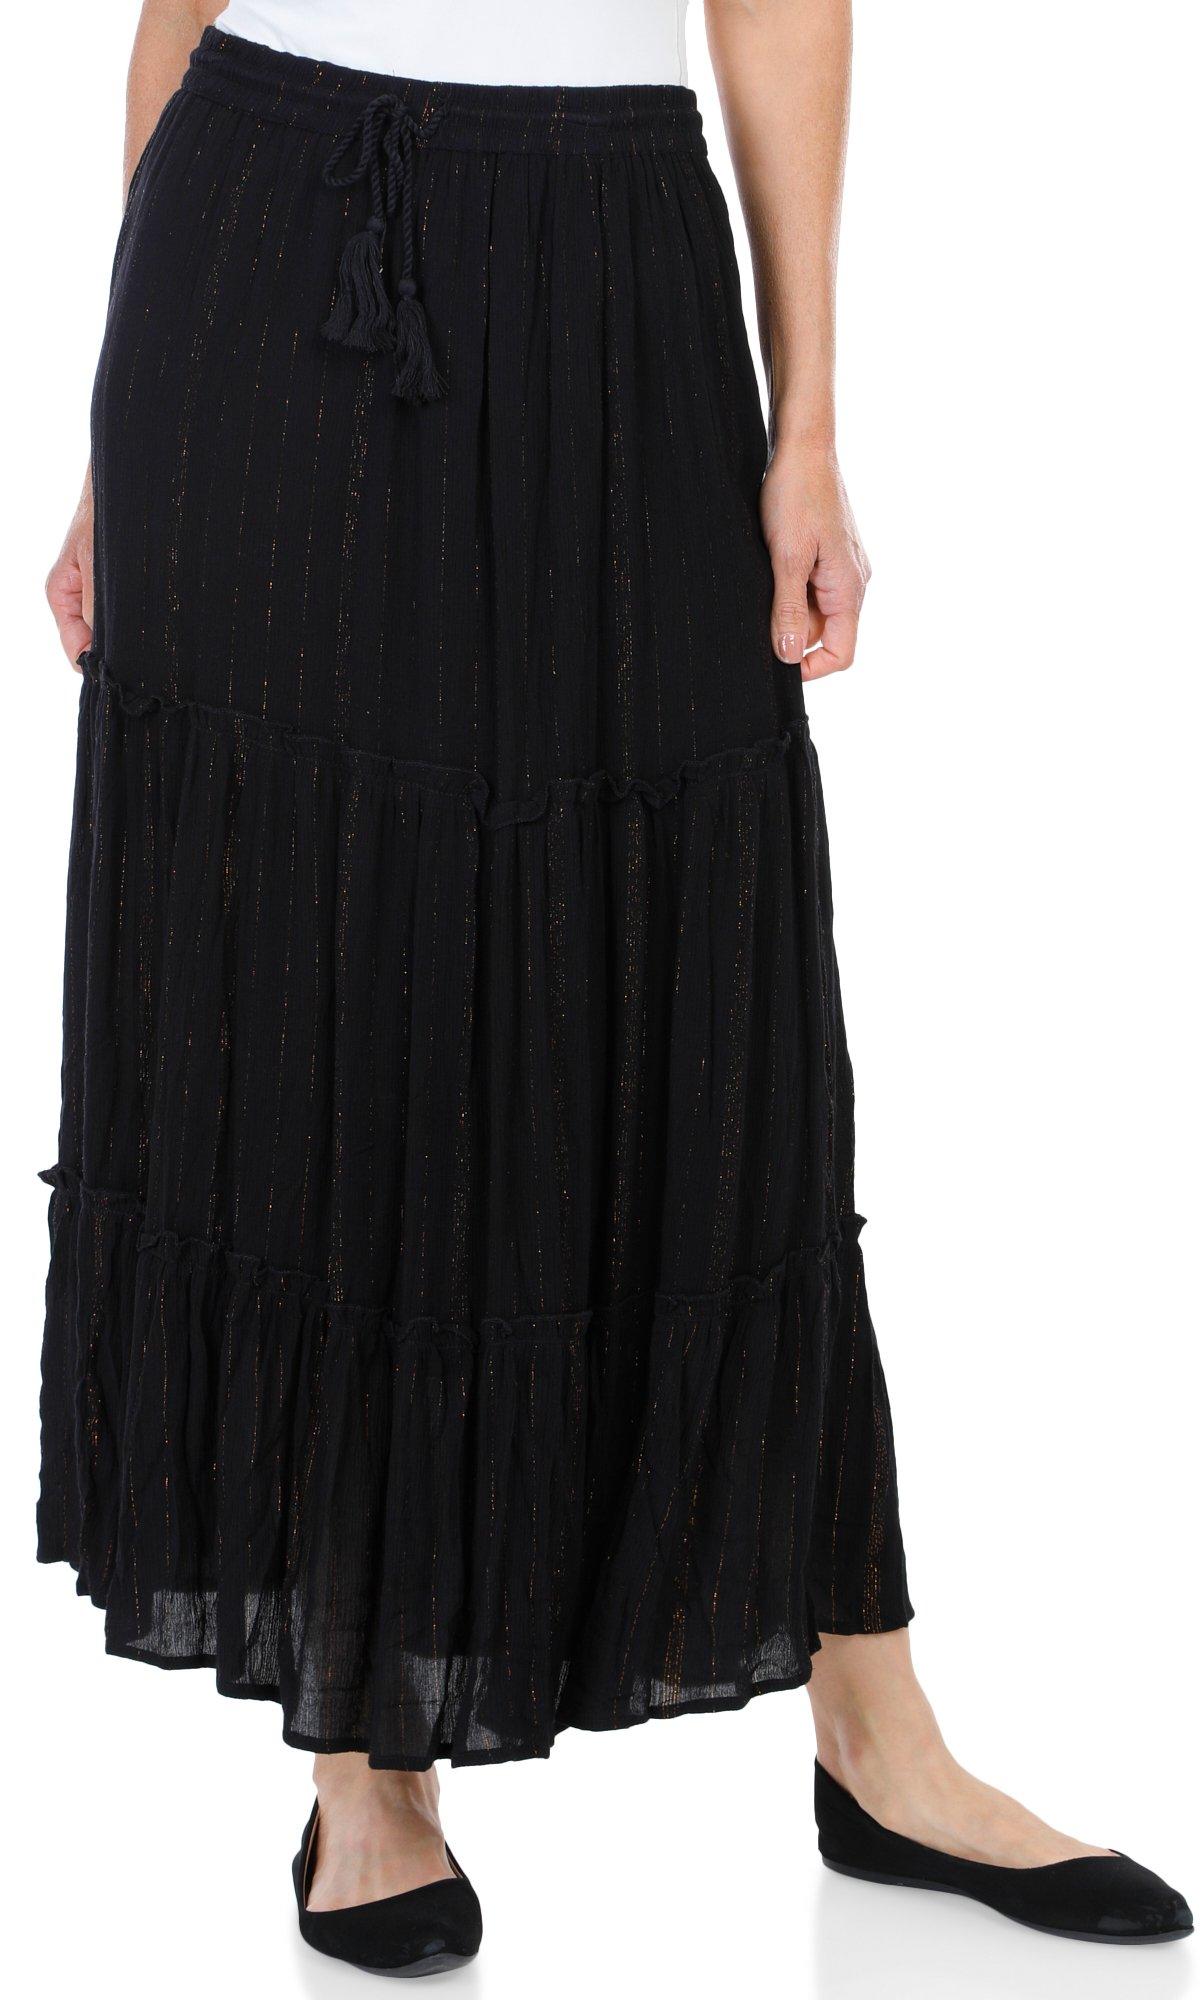 Women's Solid Tiered Maxi Skirt